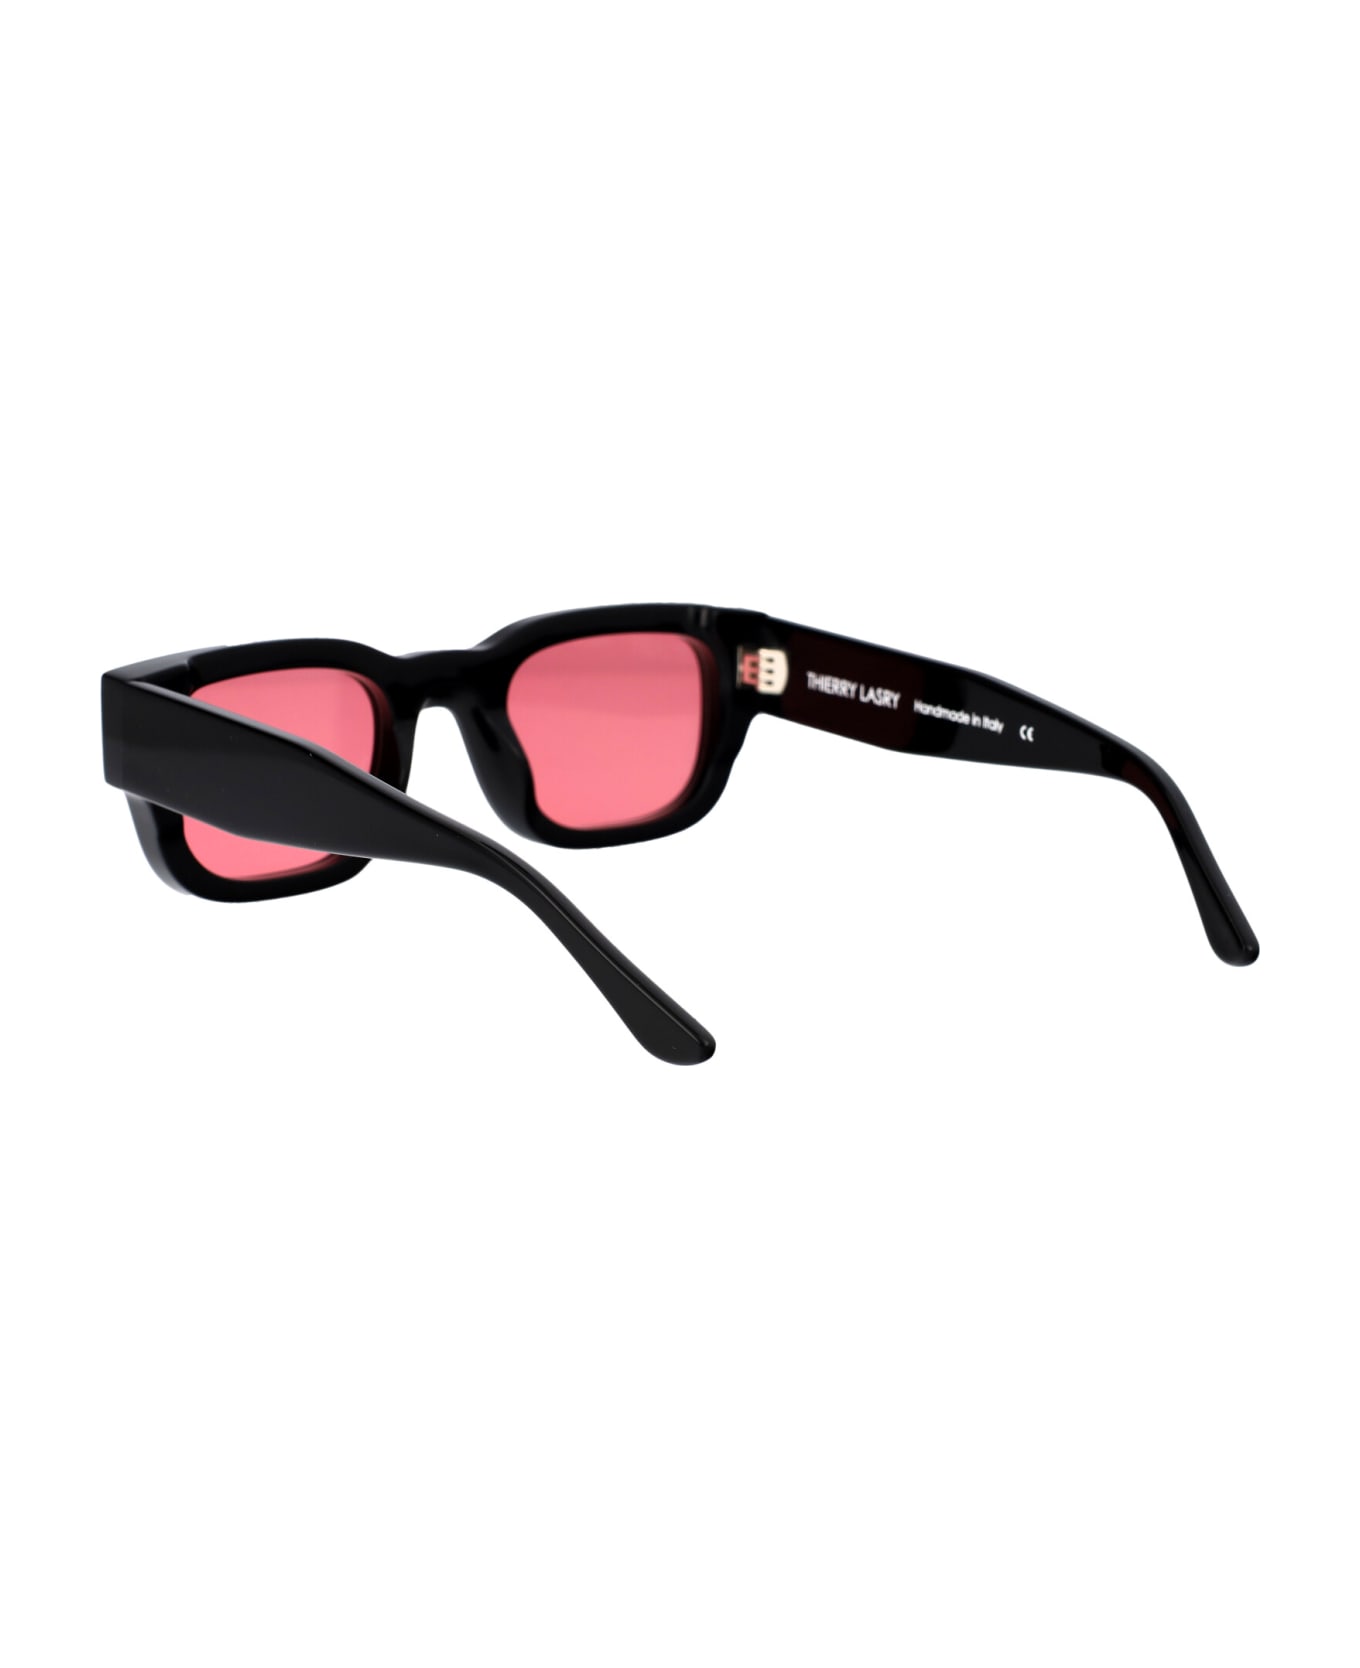 Thierry Lasry Foxxxy Sunglasses - 101 RED